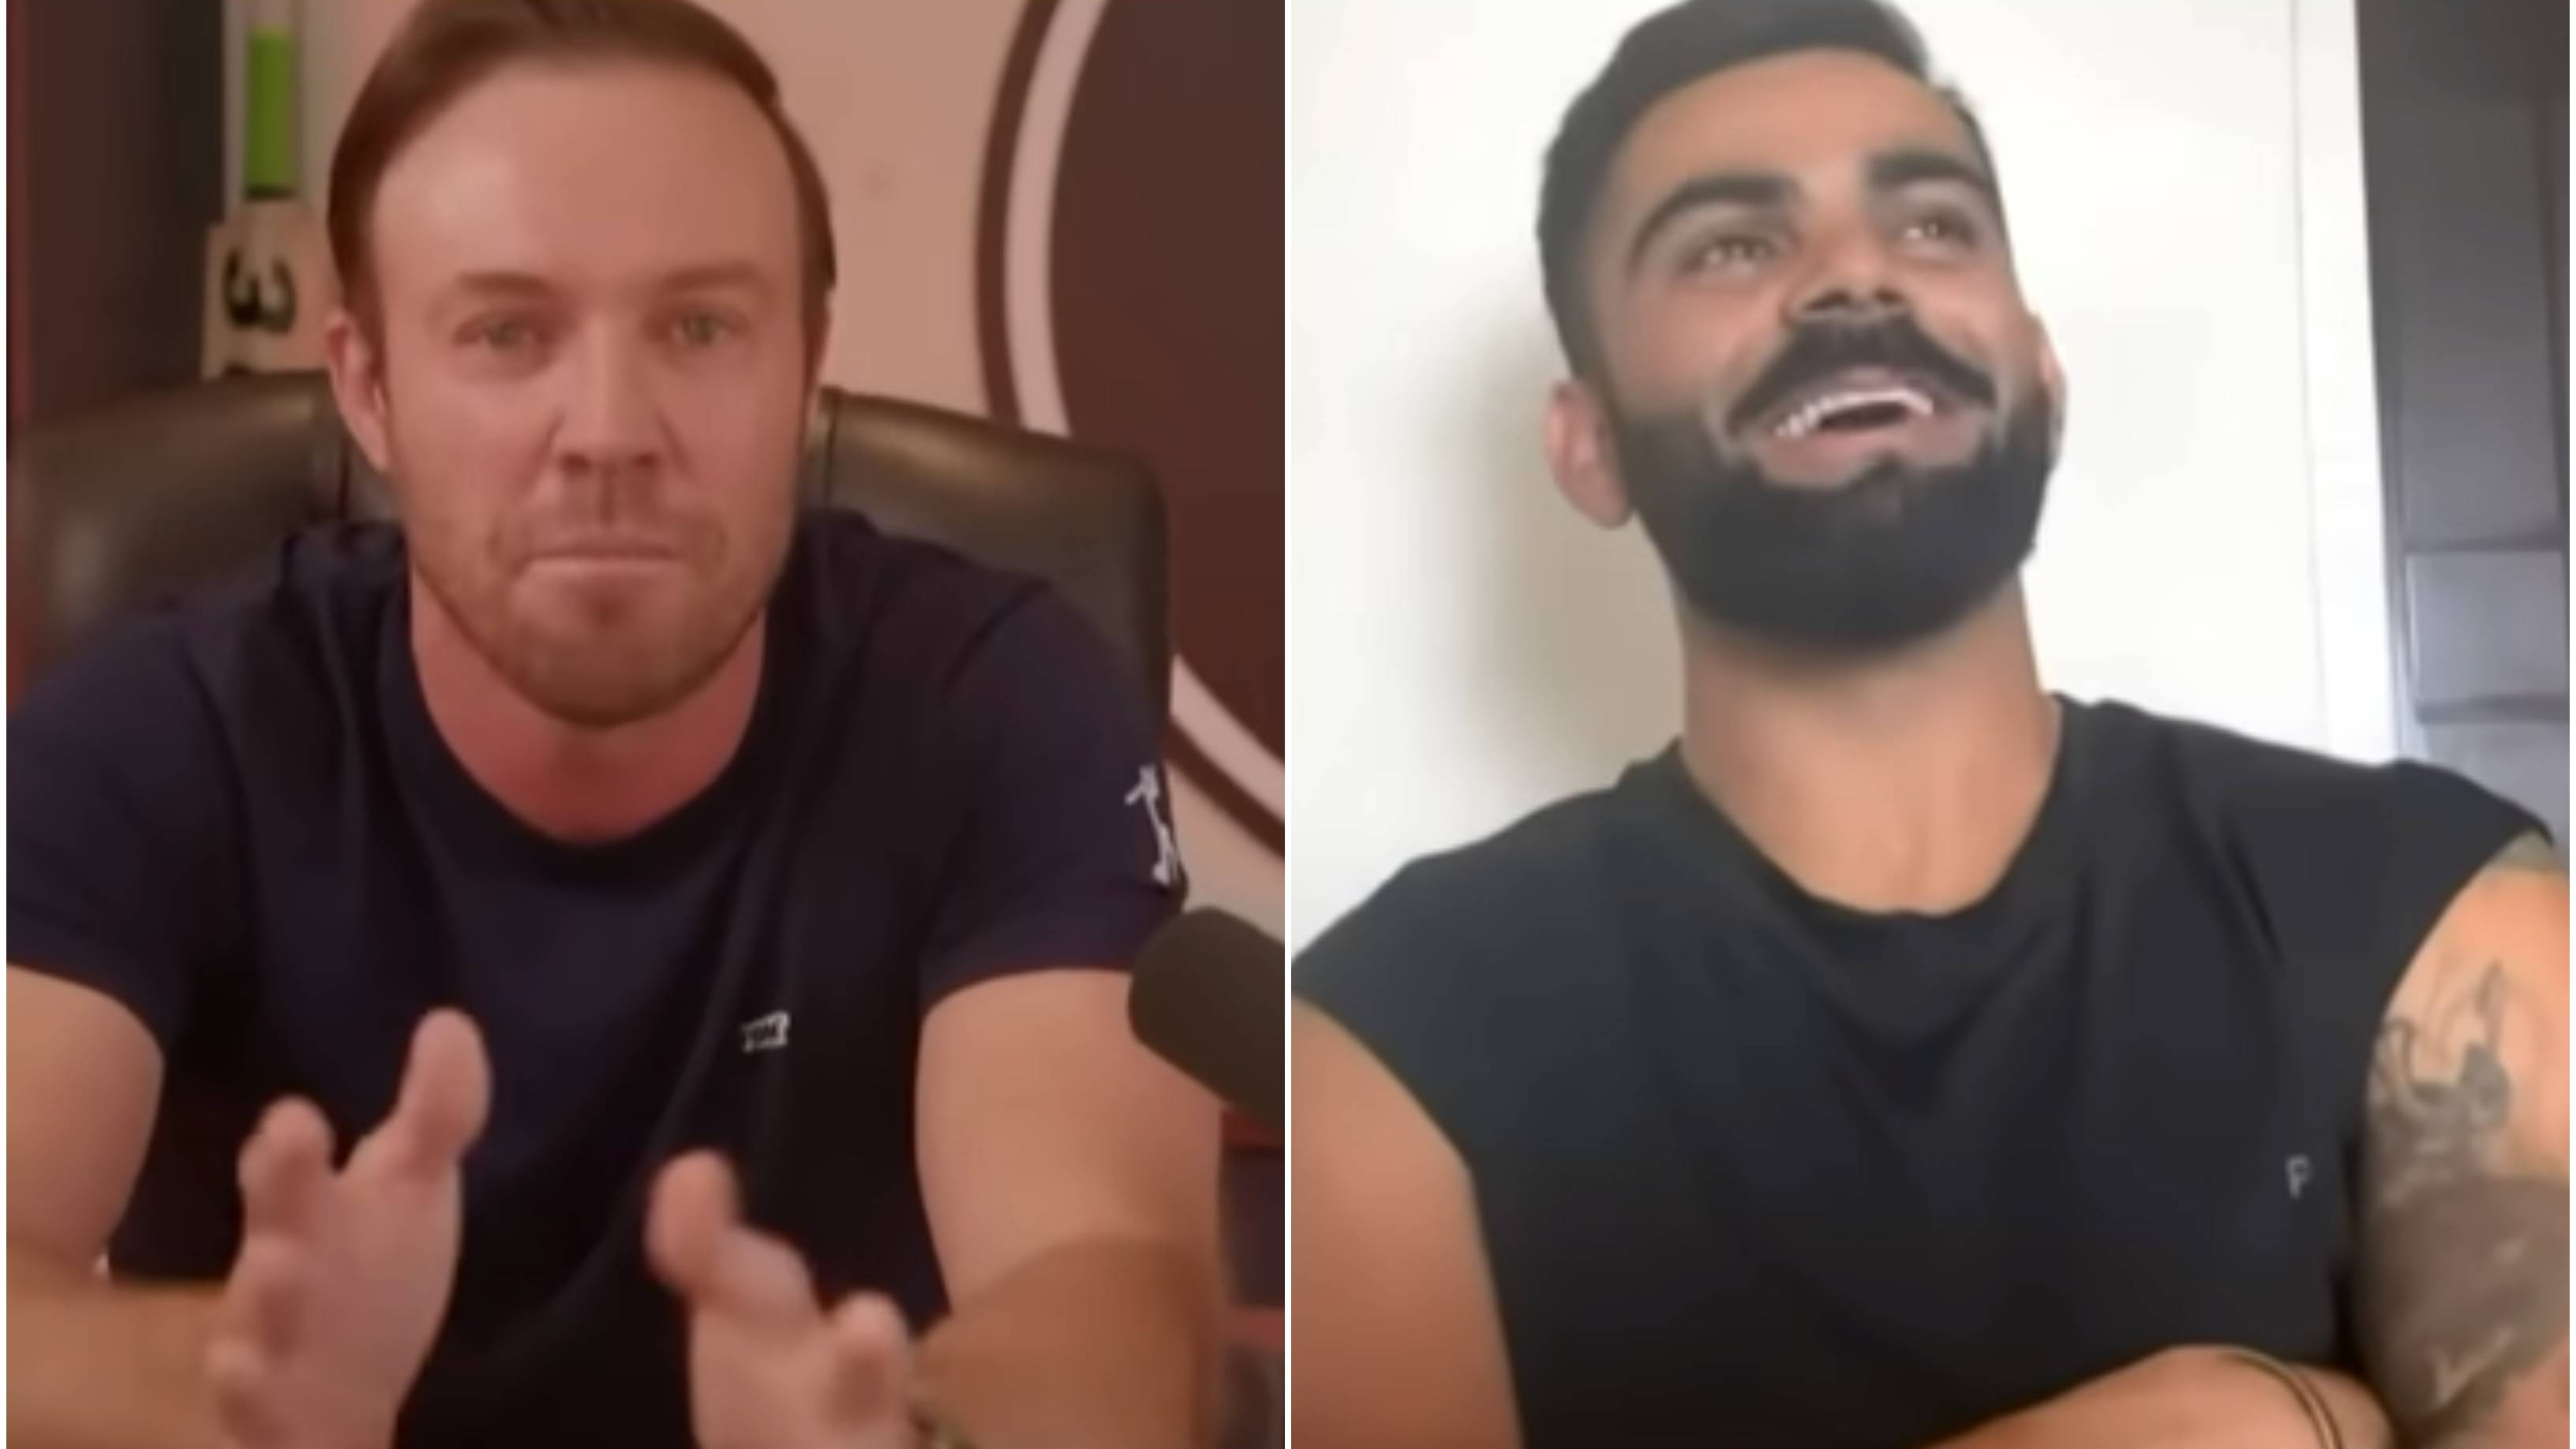 WATCH: Virat Kohli in absolute splits as AB de Villiers almost calls him ‘old' during a fun chat